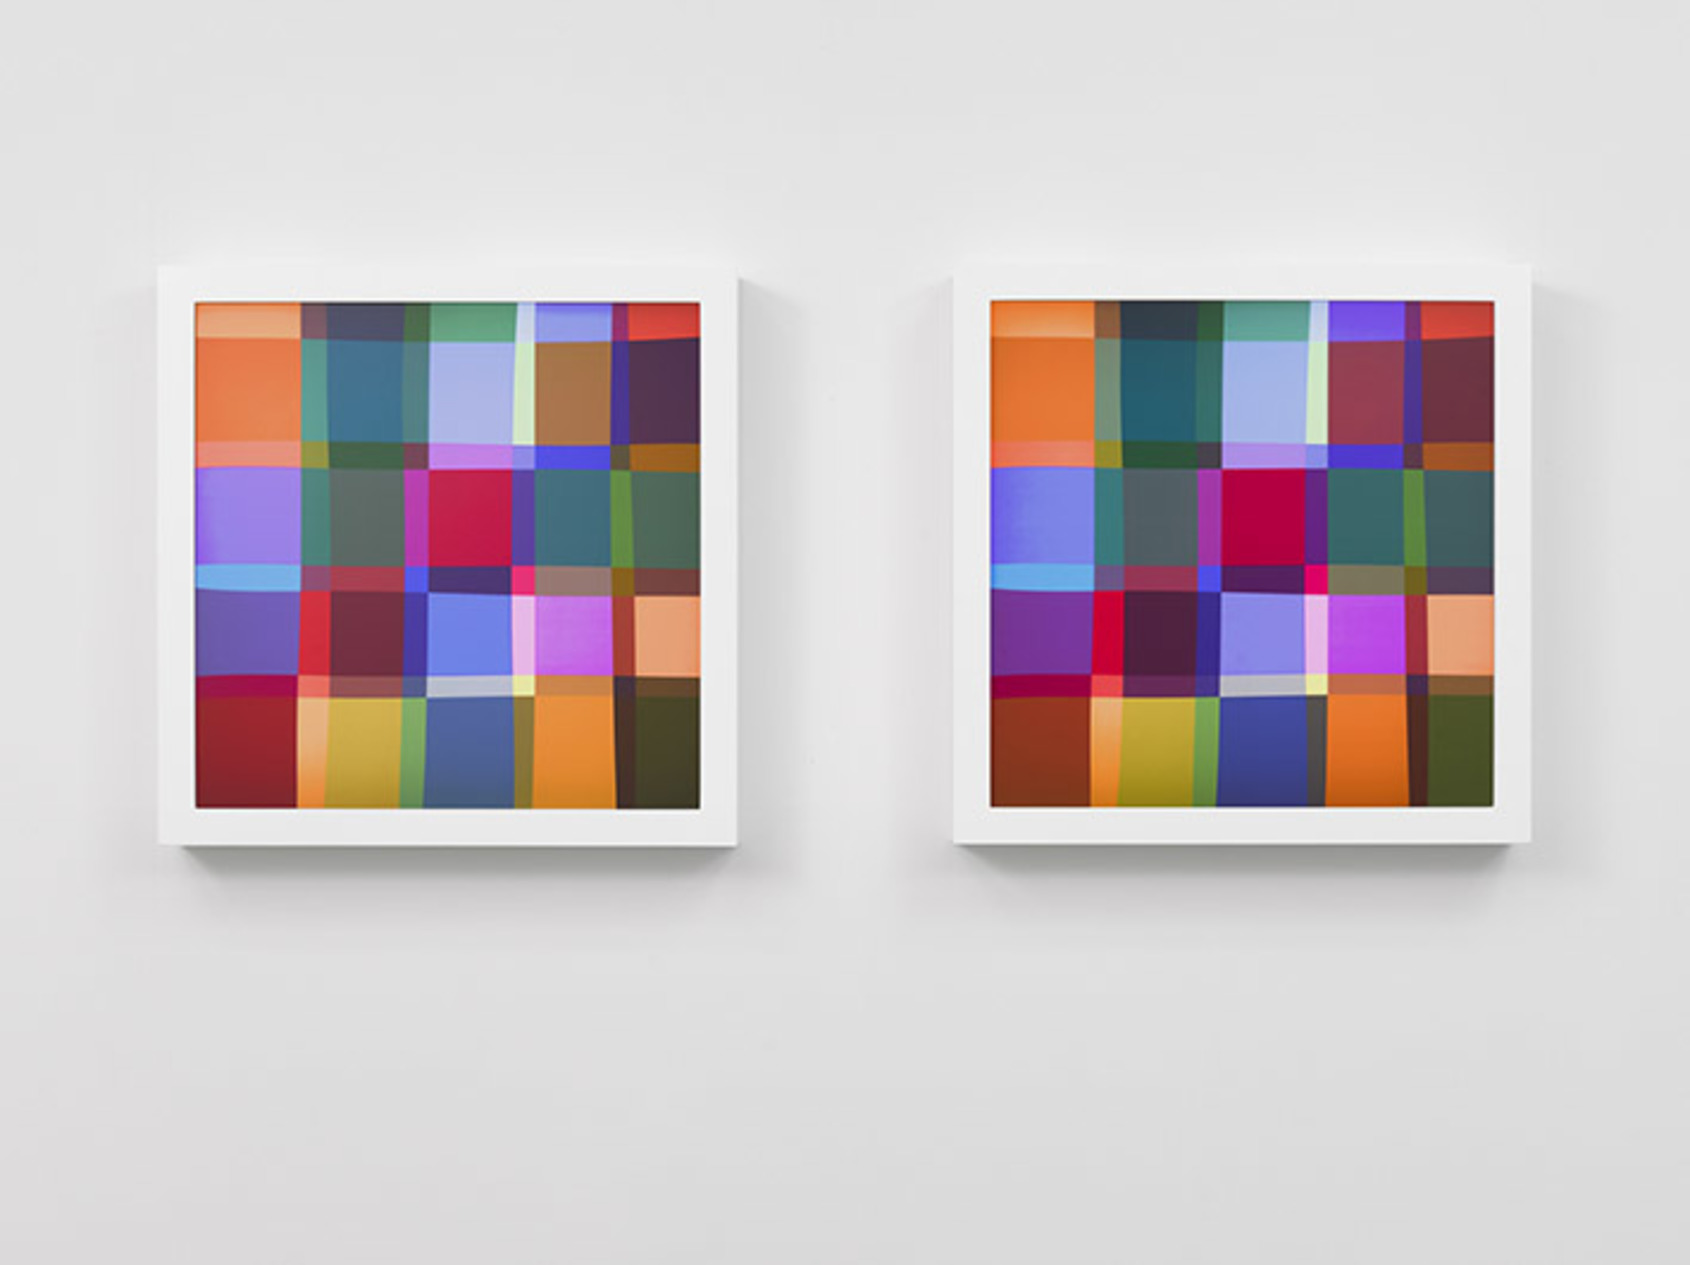  Caption: Spencer Finch, “Color Test – 72”, 2019, LED lightbox and Fujitrans (diptych), Painting, 81.3 x 81.3 cm (each), Courtesy of the artist and Lisson Gallery 